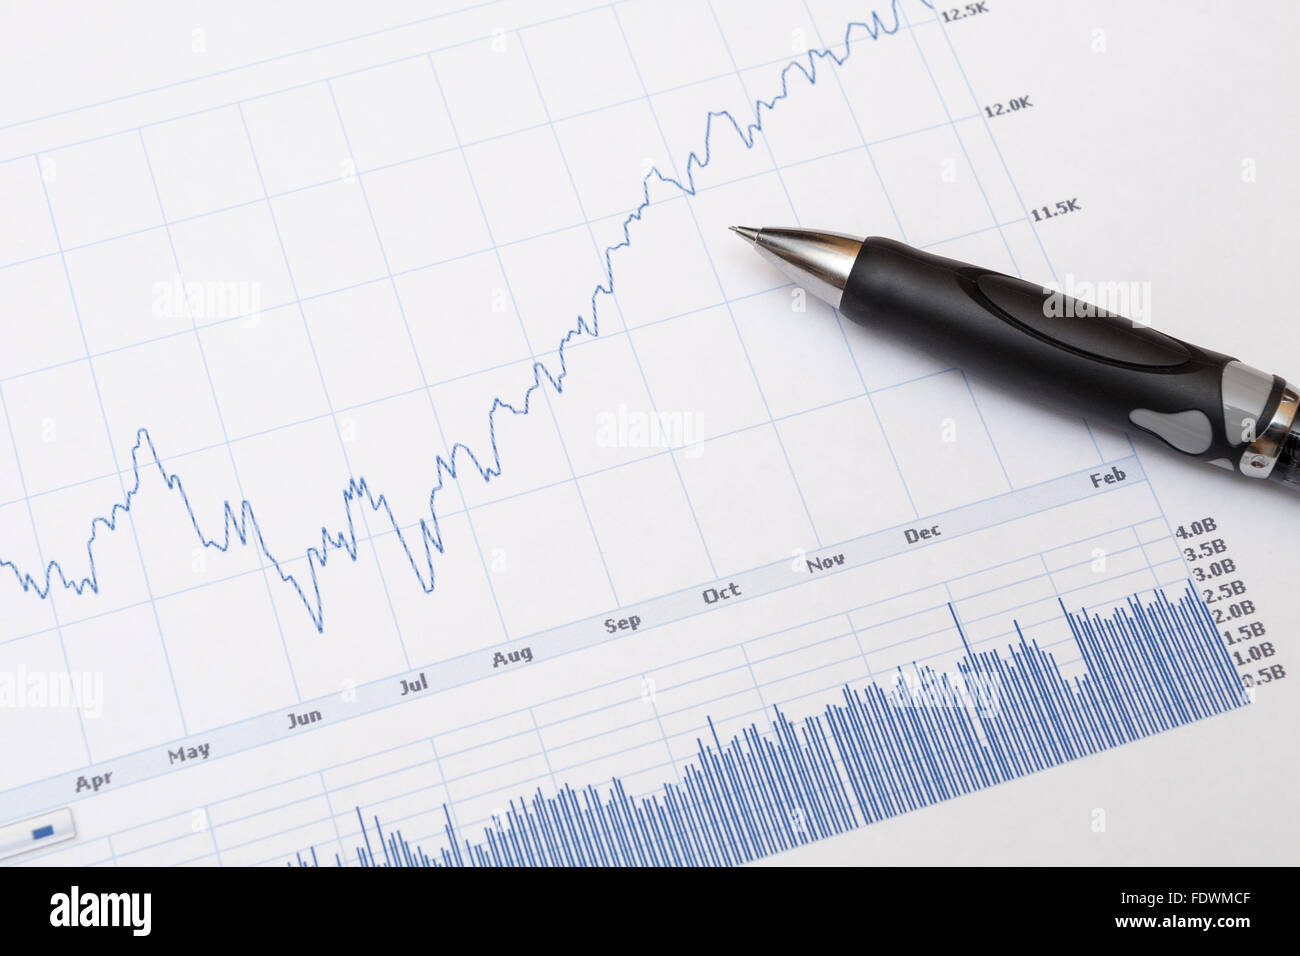 Financial market or economy line graph chart and pencil  Model Release: No.  Property Release: No. Stock Photo